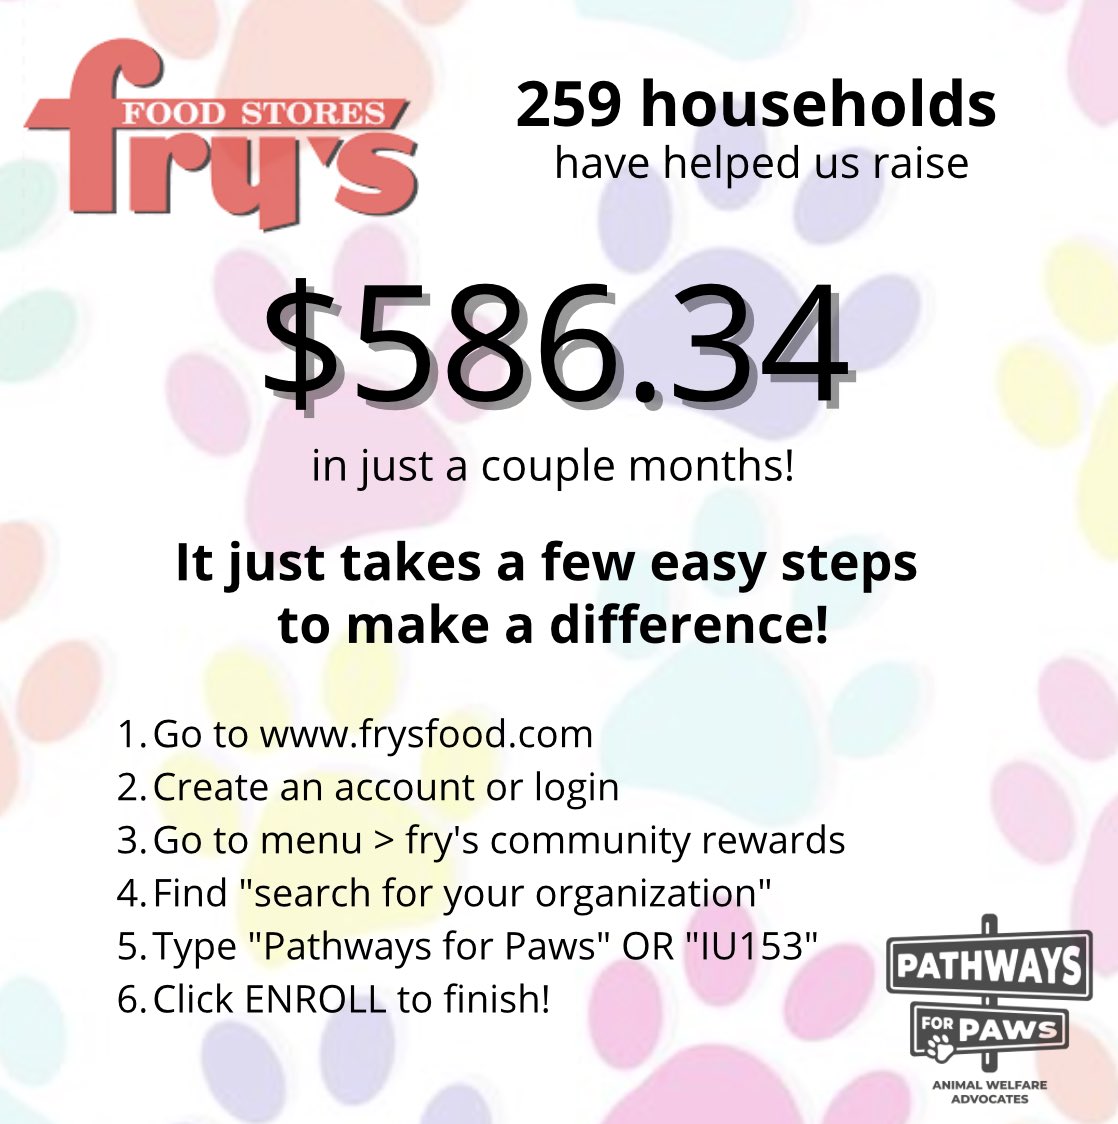 We had 16 more households sign up this quarter than last 🫶🏼 your every day shopping makes a huge difference & we are so grateful! If you haven’t yet, please follow the steps below to add Pathways for Paws to your Fry’s Reward Card 🐾 it takes a few minutes & costs you nothing!